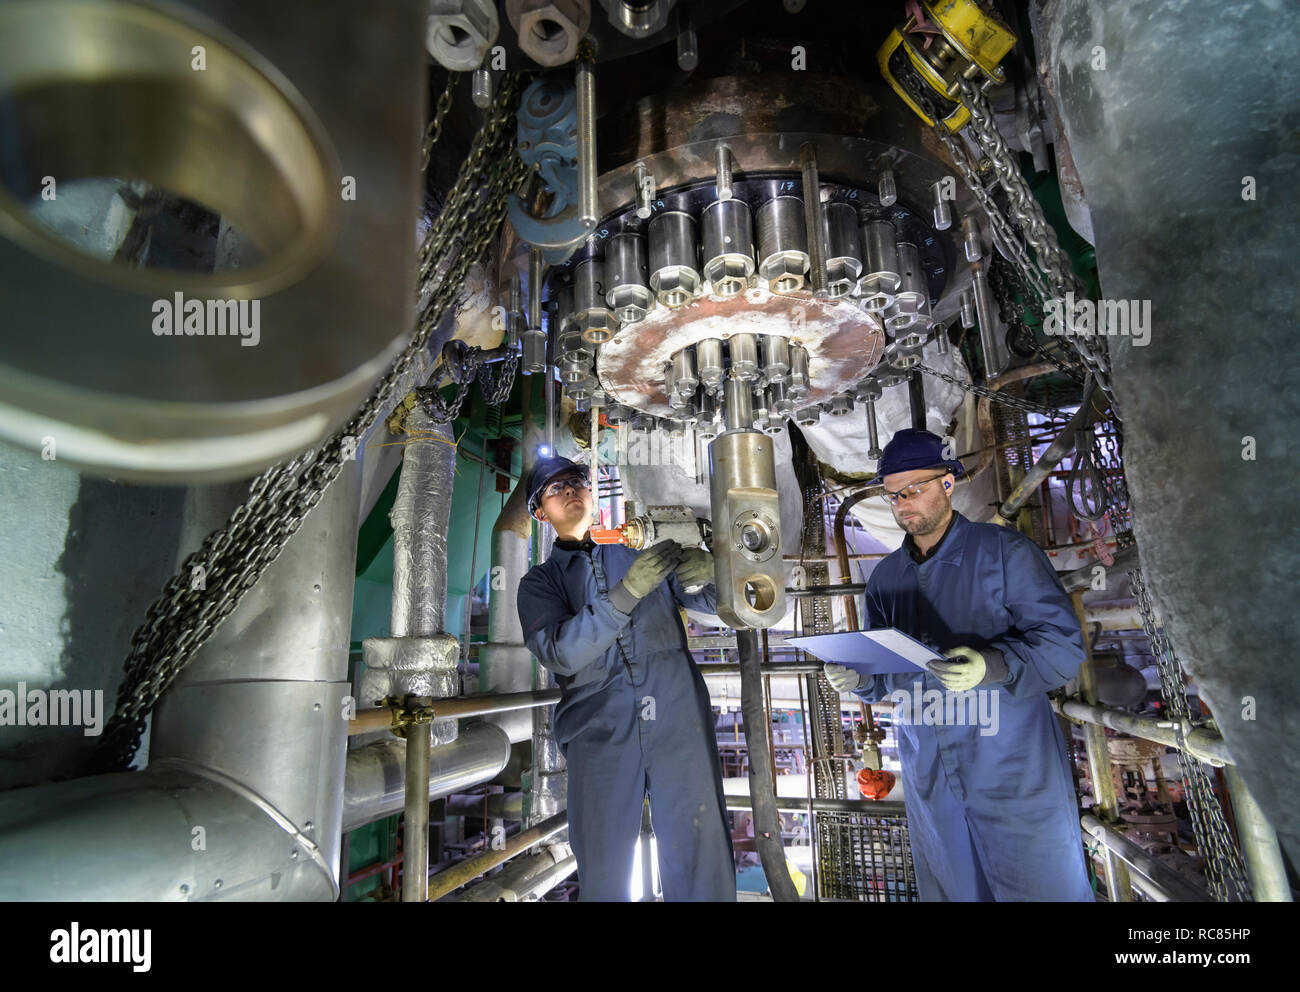 Engineers working in confined space under turbine during outage in nuclear power station Stock Photo